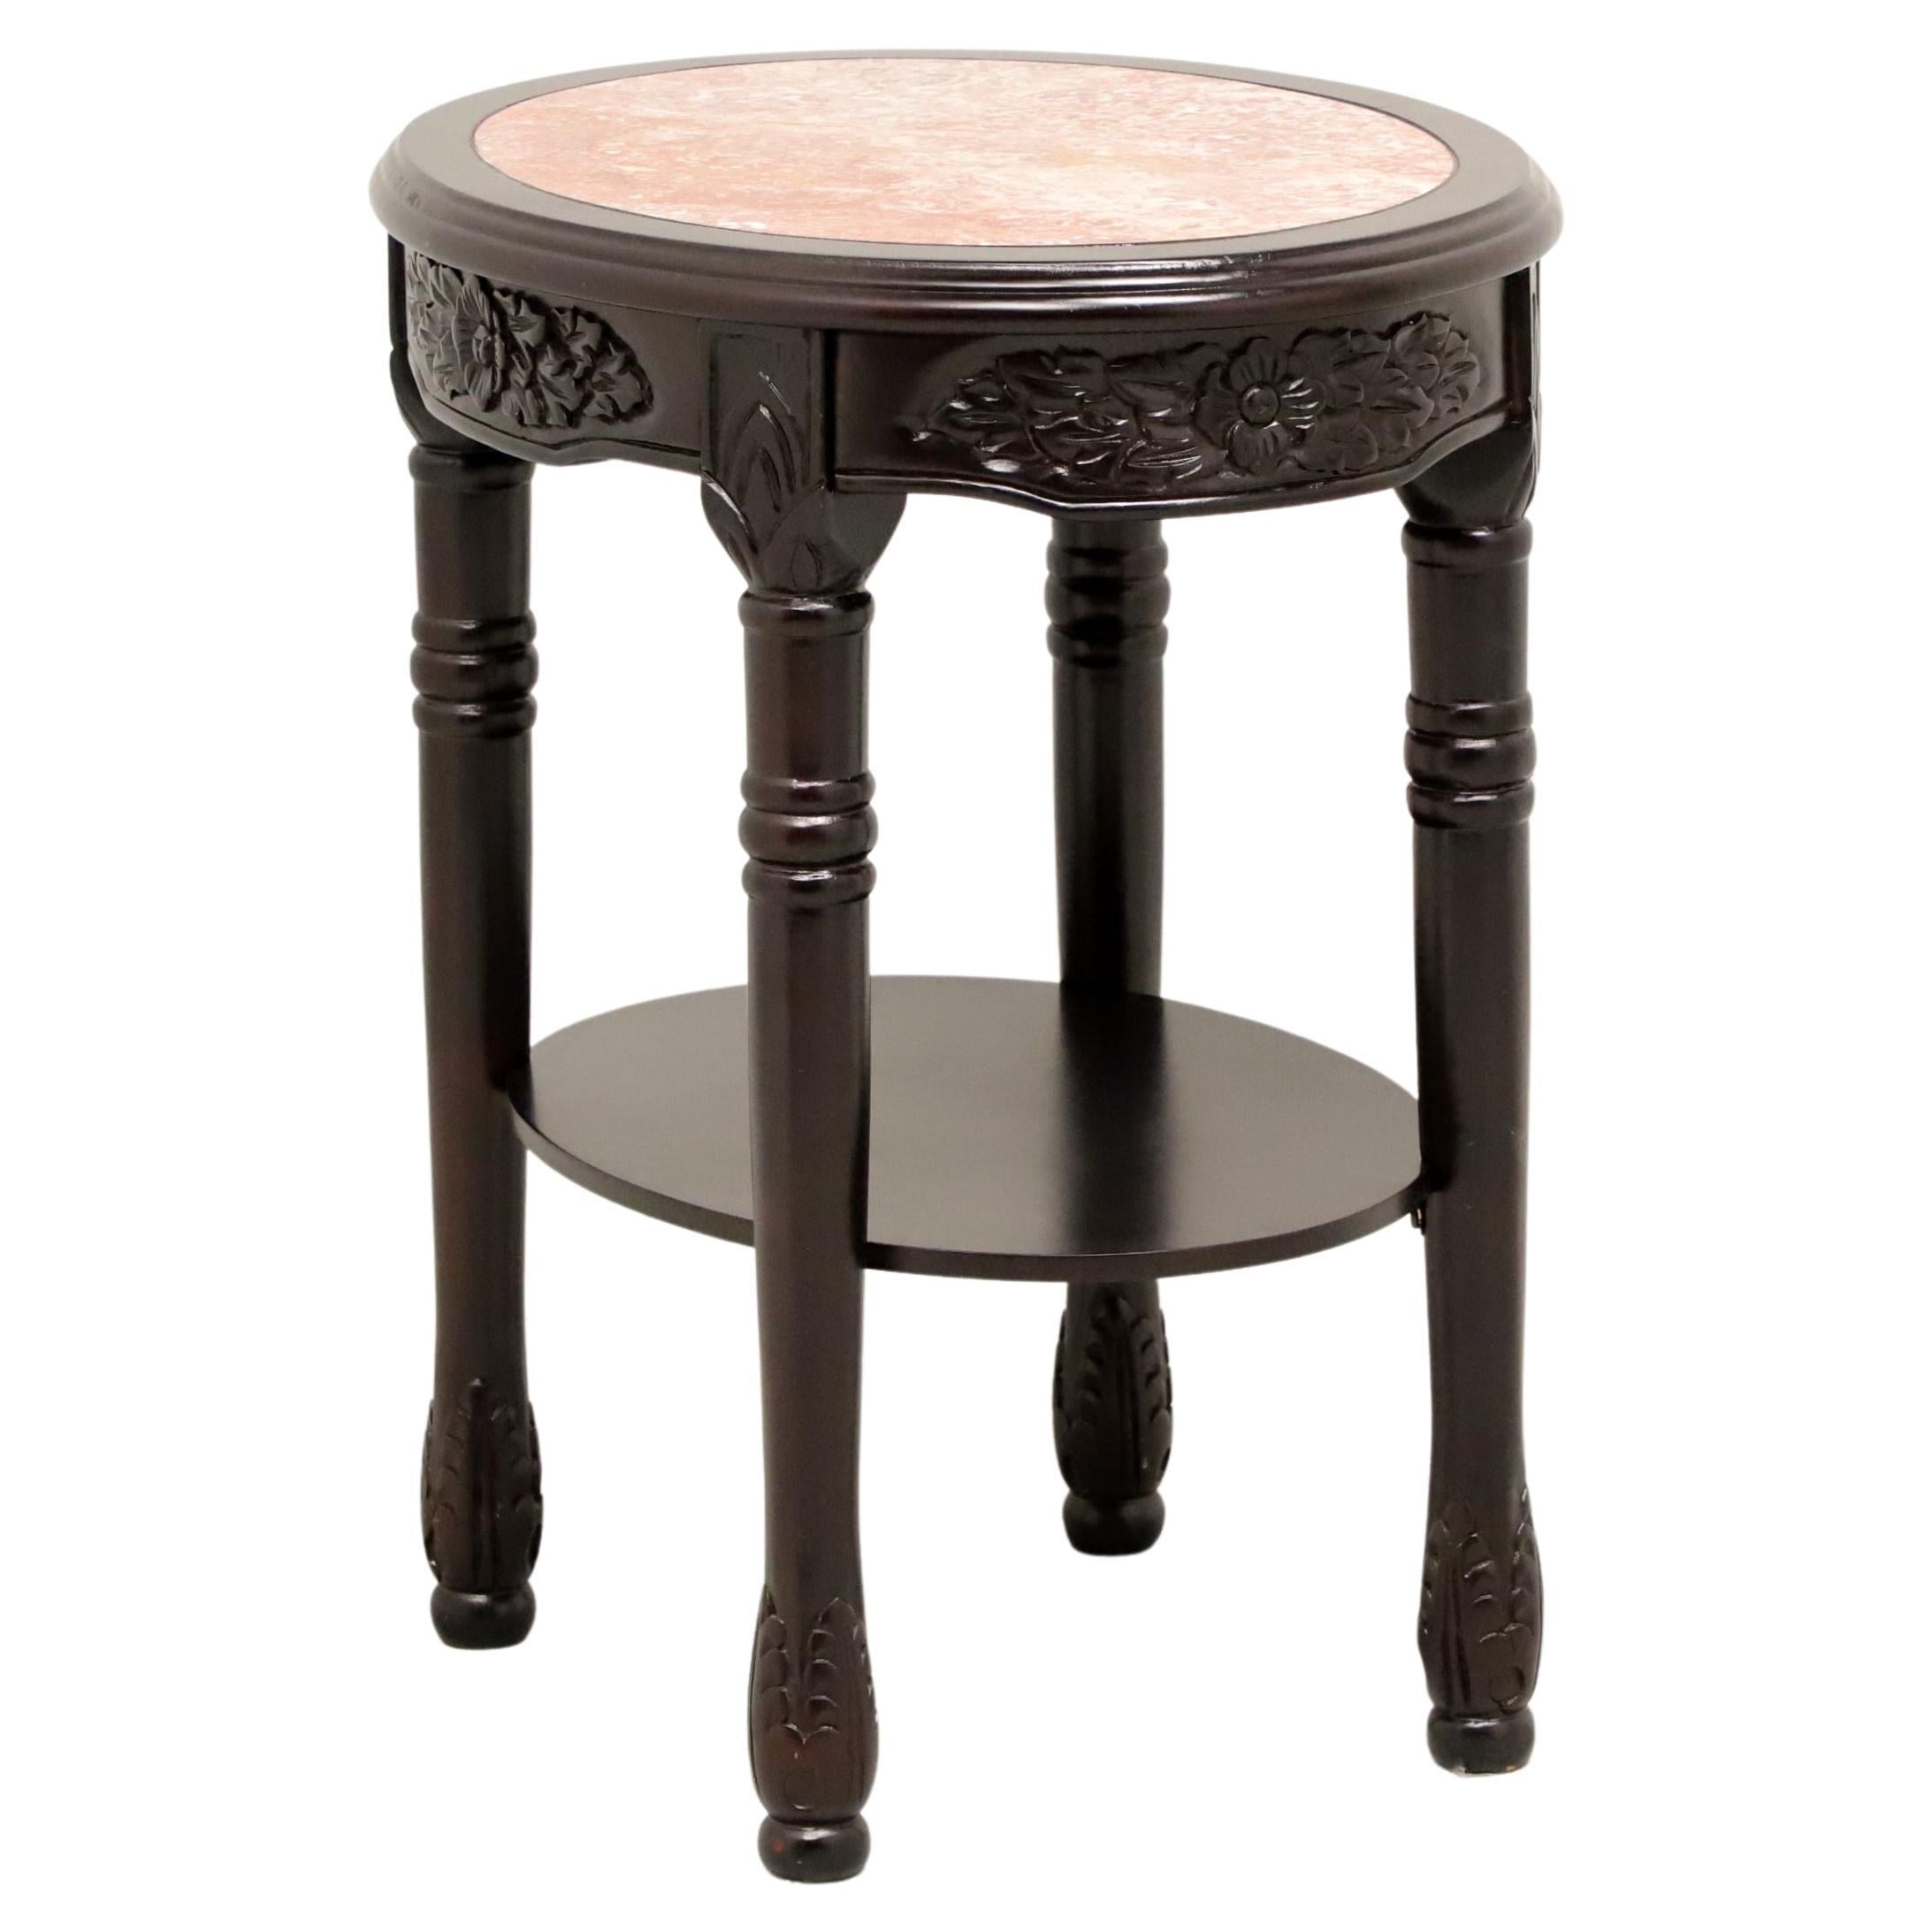 Antique Rosewood Finish Victorian Oval Marble Top Occasional Table - B For Sale